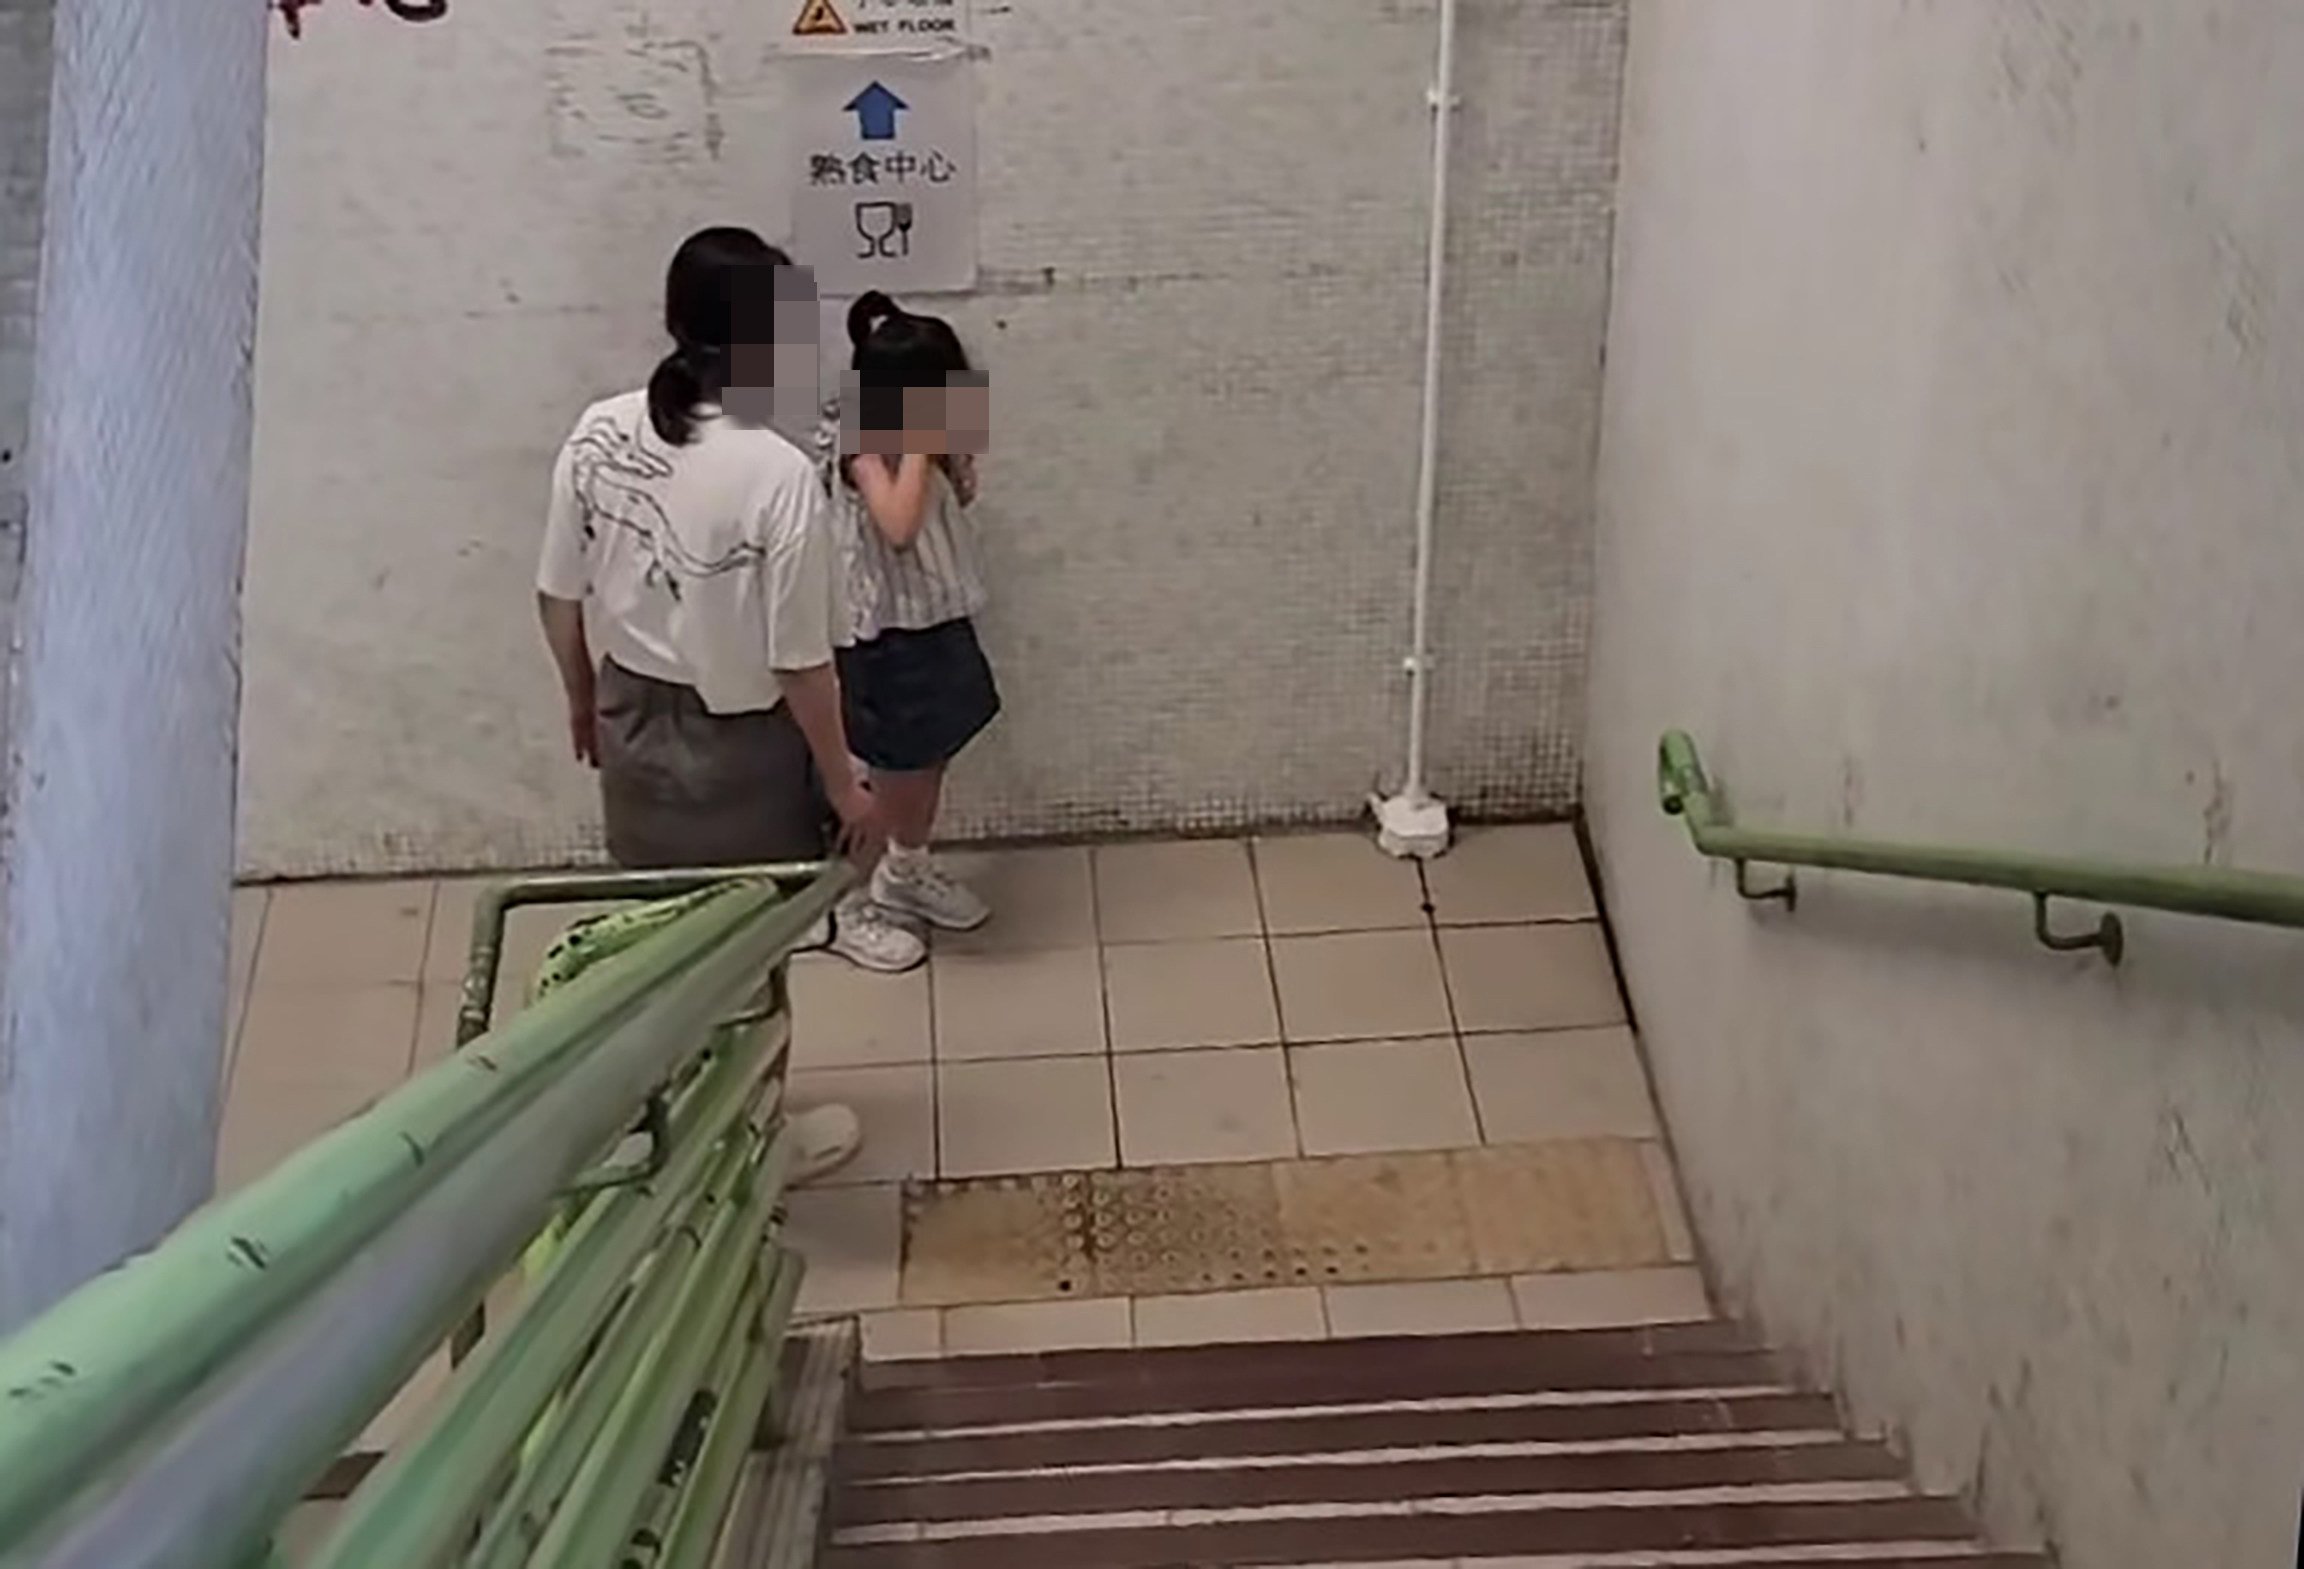 The video clip also shows a woman scolding the girl and slapping her on the backstairs of a building. Photo: Facebook/Boll Che Li